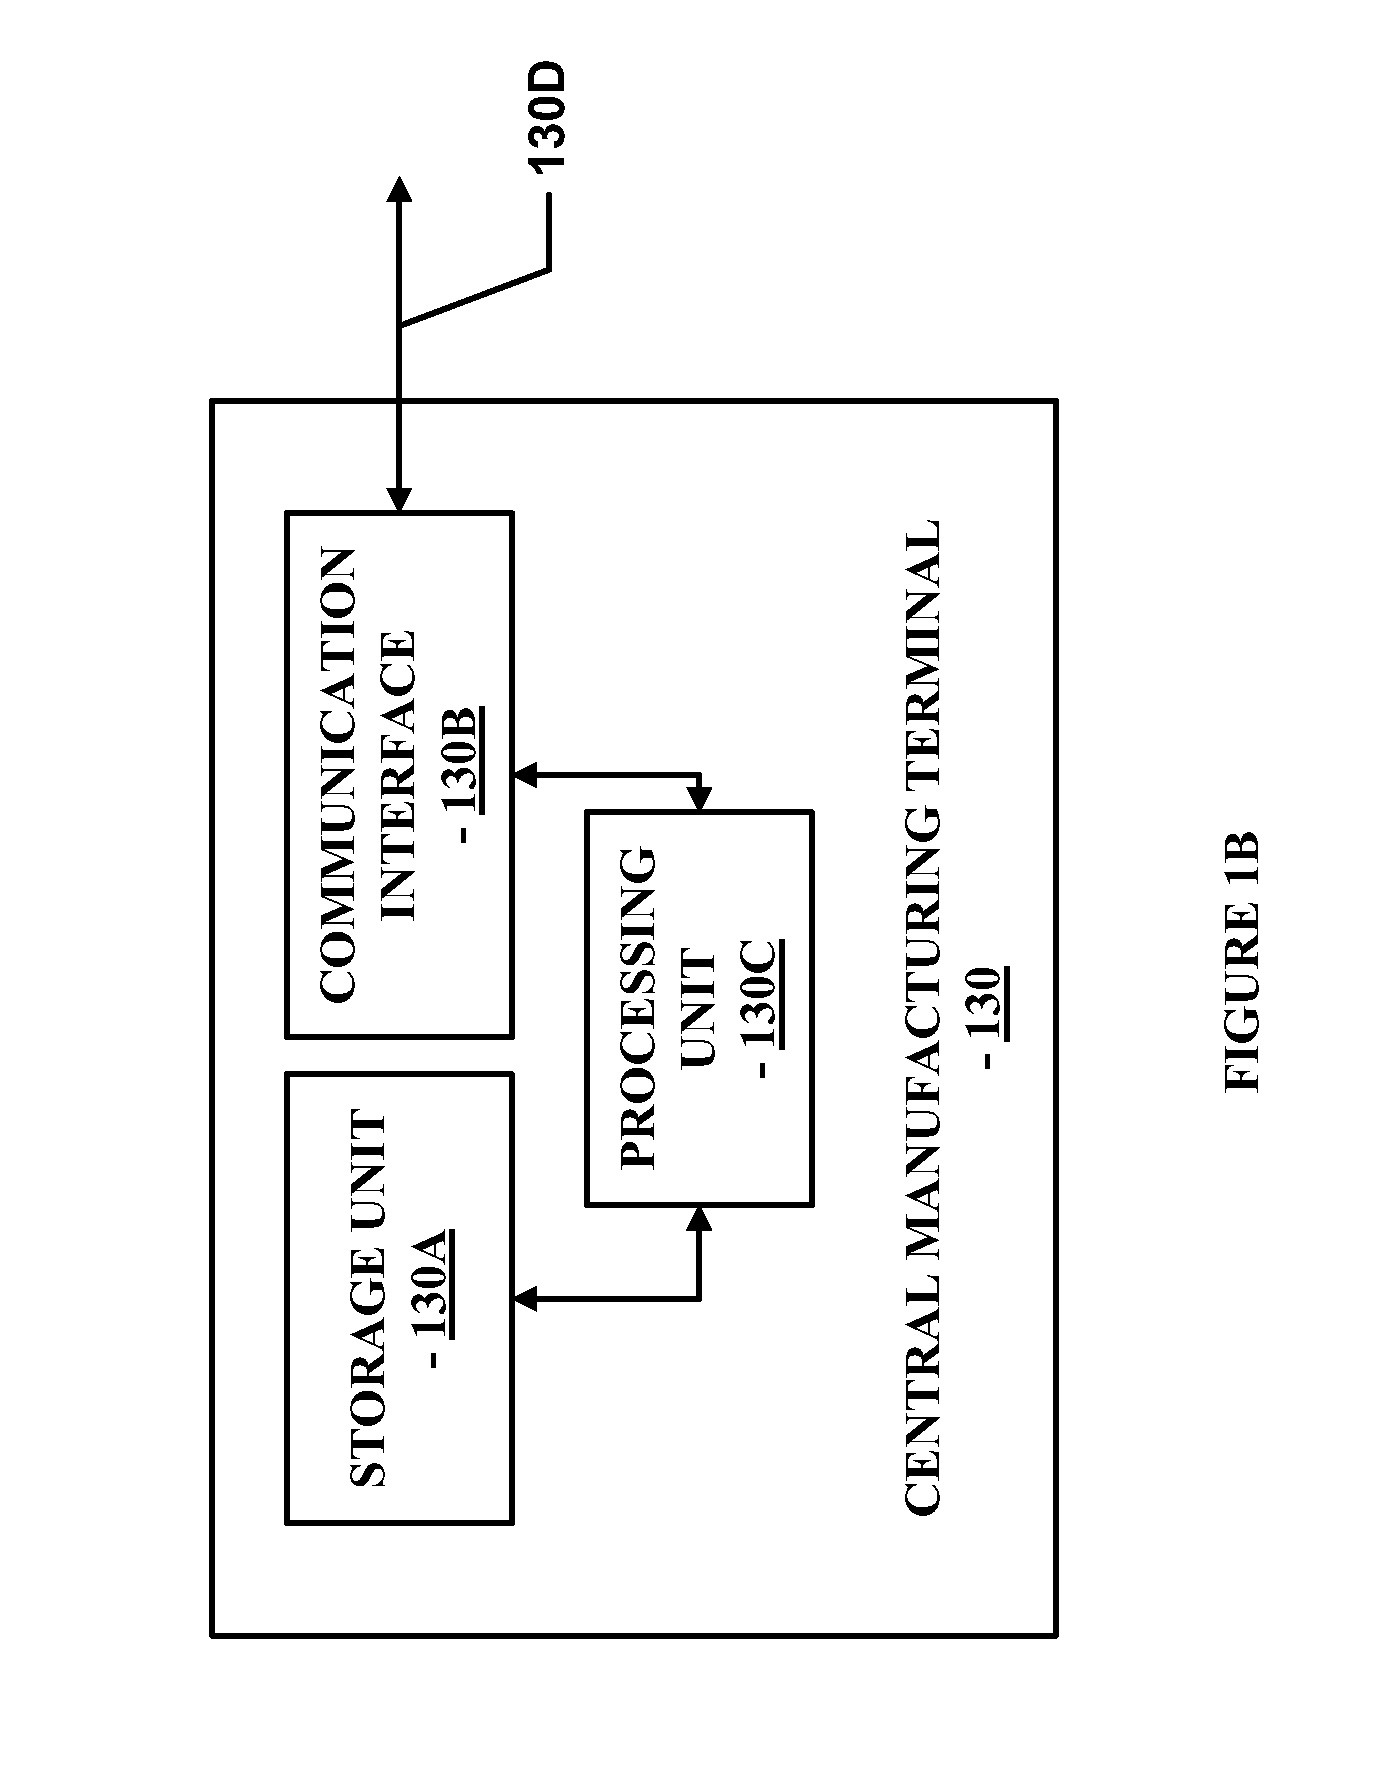 Method and system for providing automated high scale fabrication of custom items